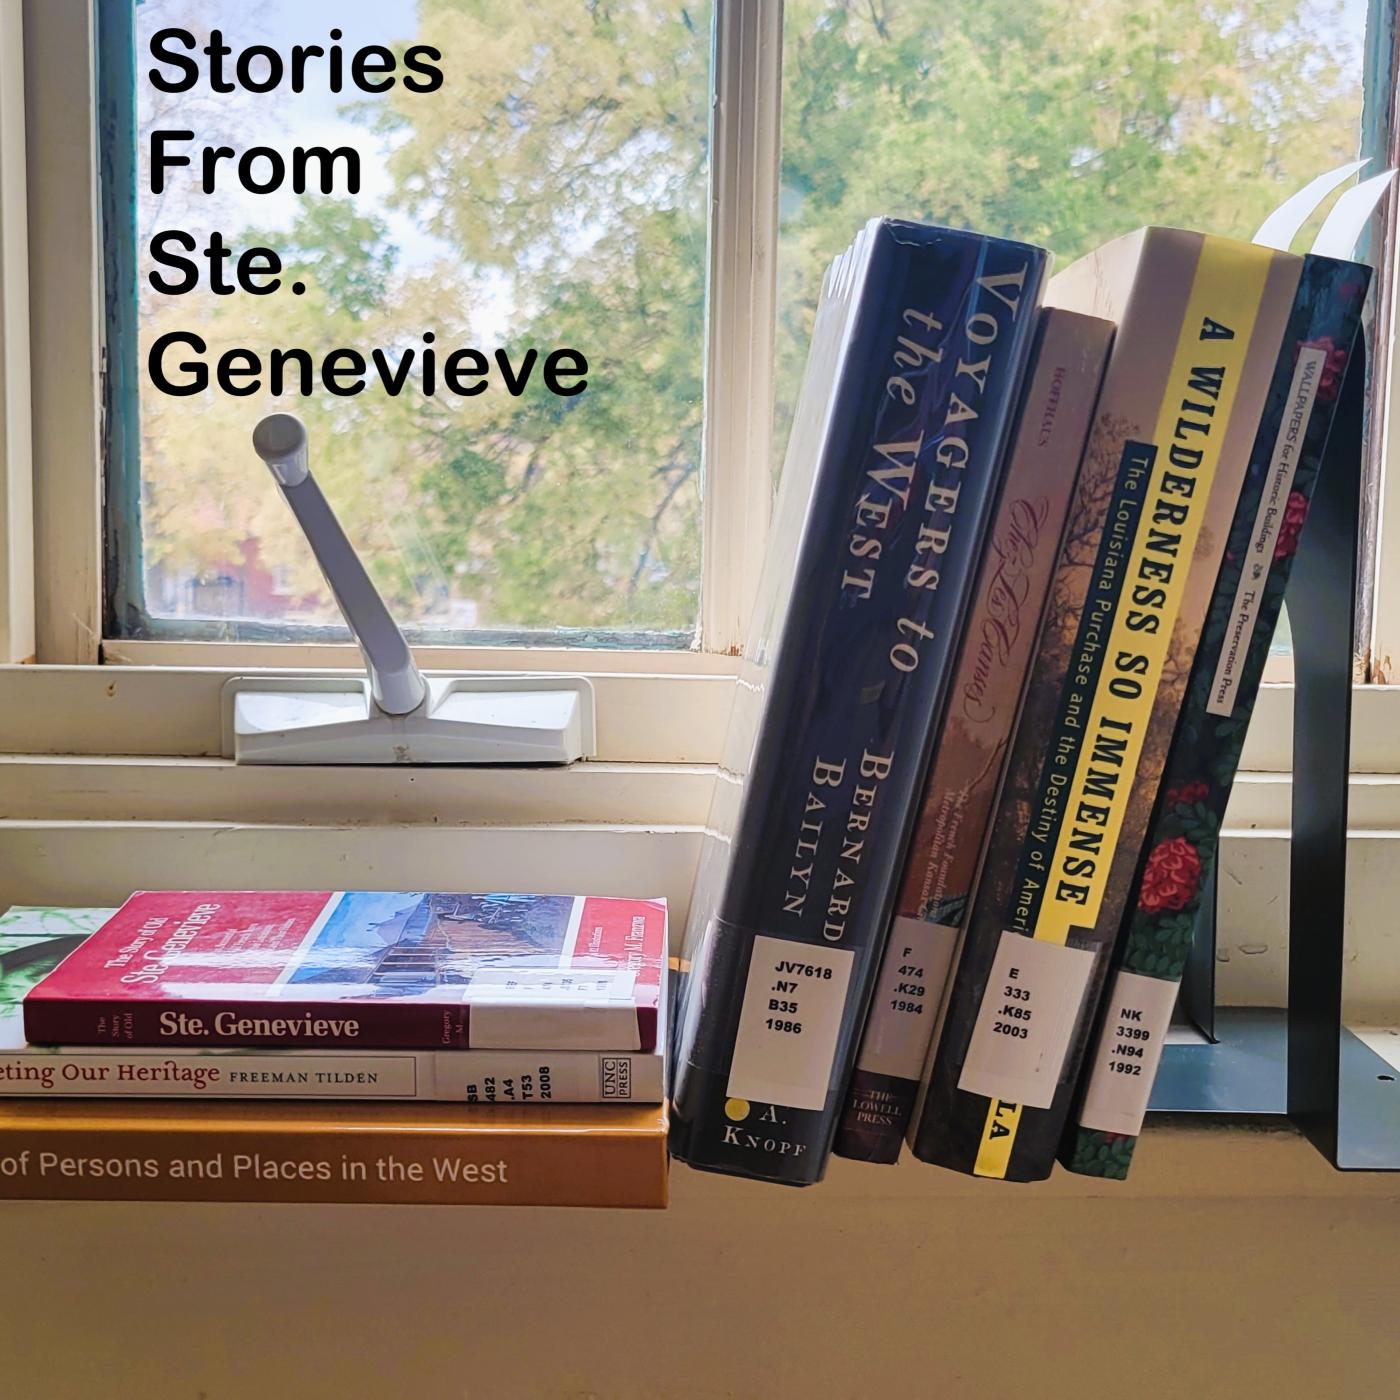 3 books stacked against 4 other books places on a windowsill, with a tree beyond the window.